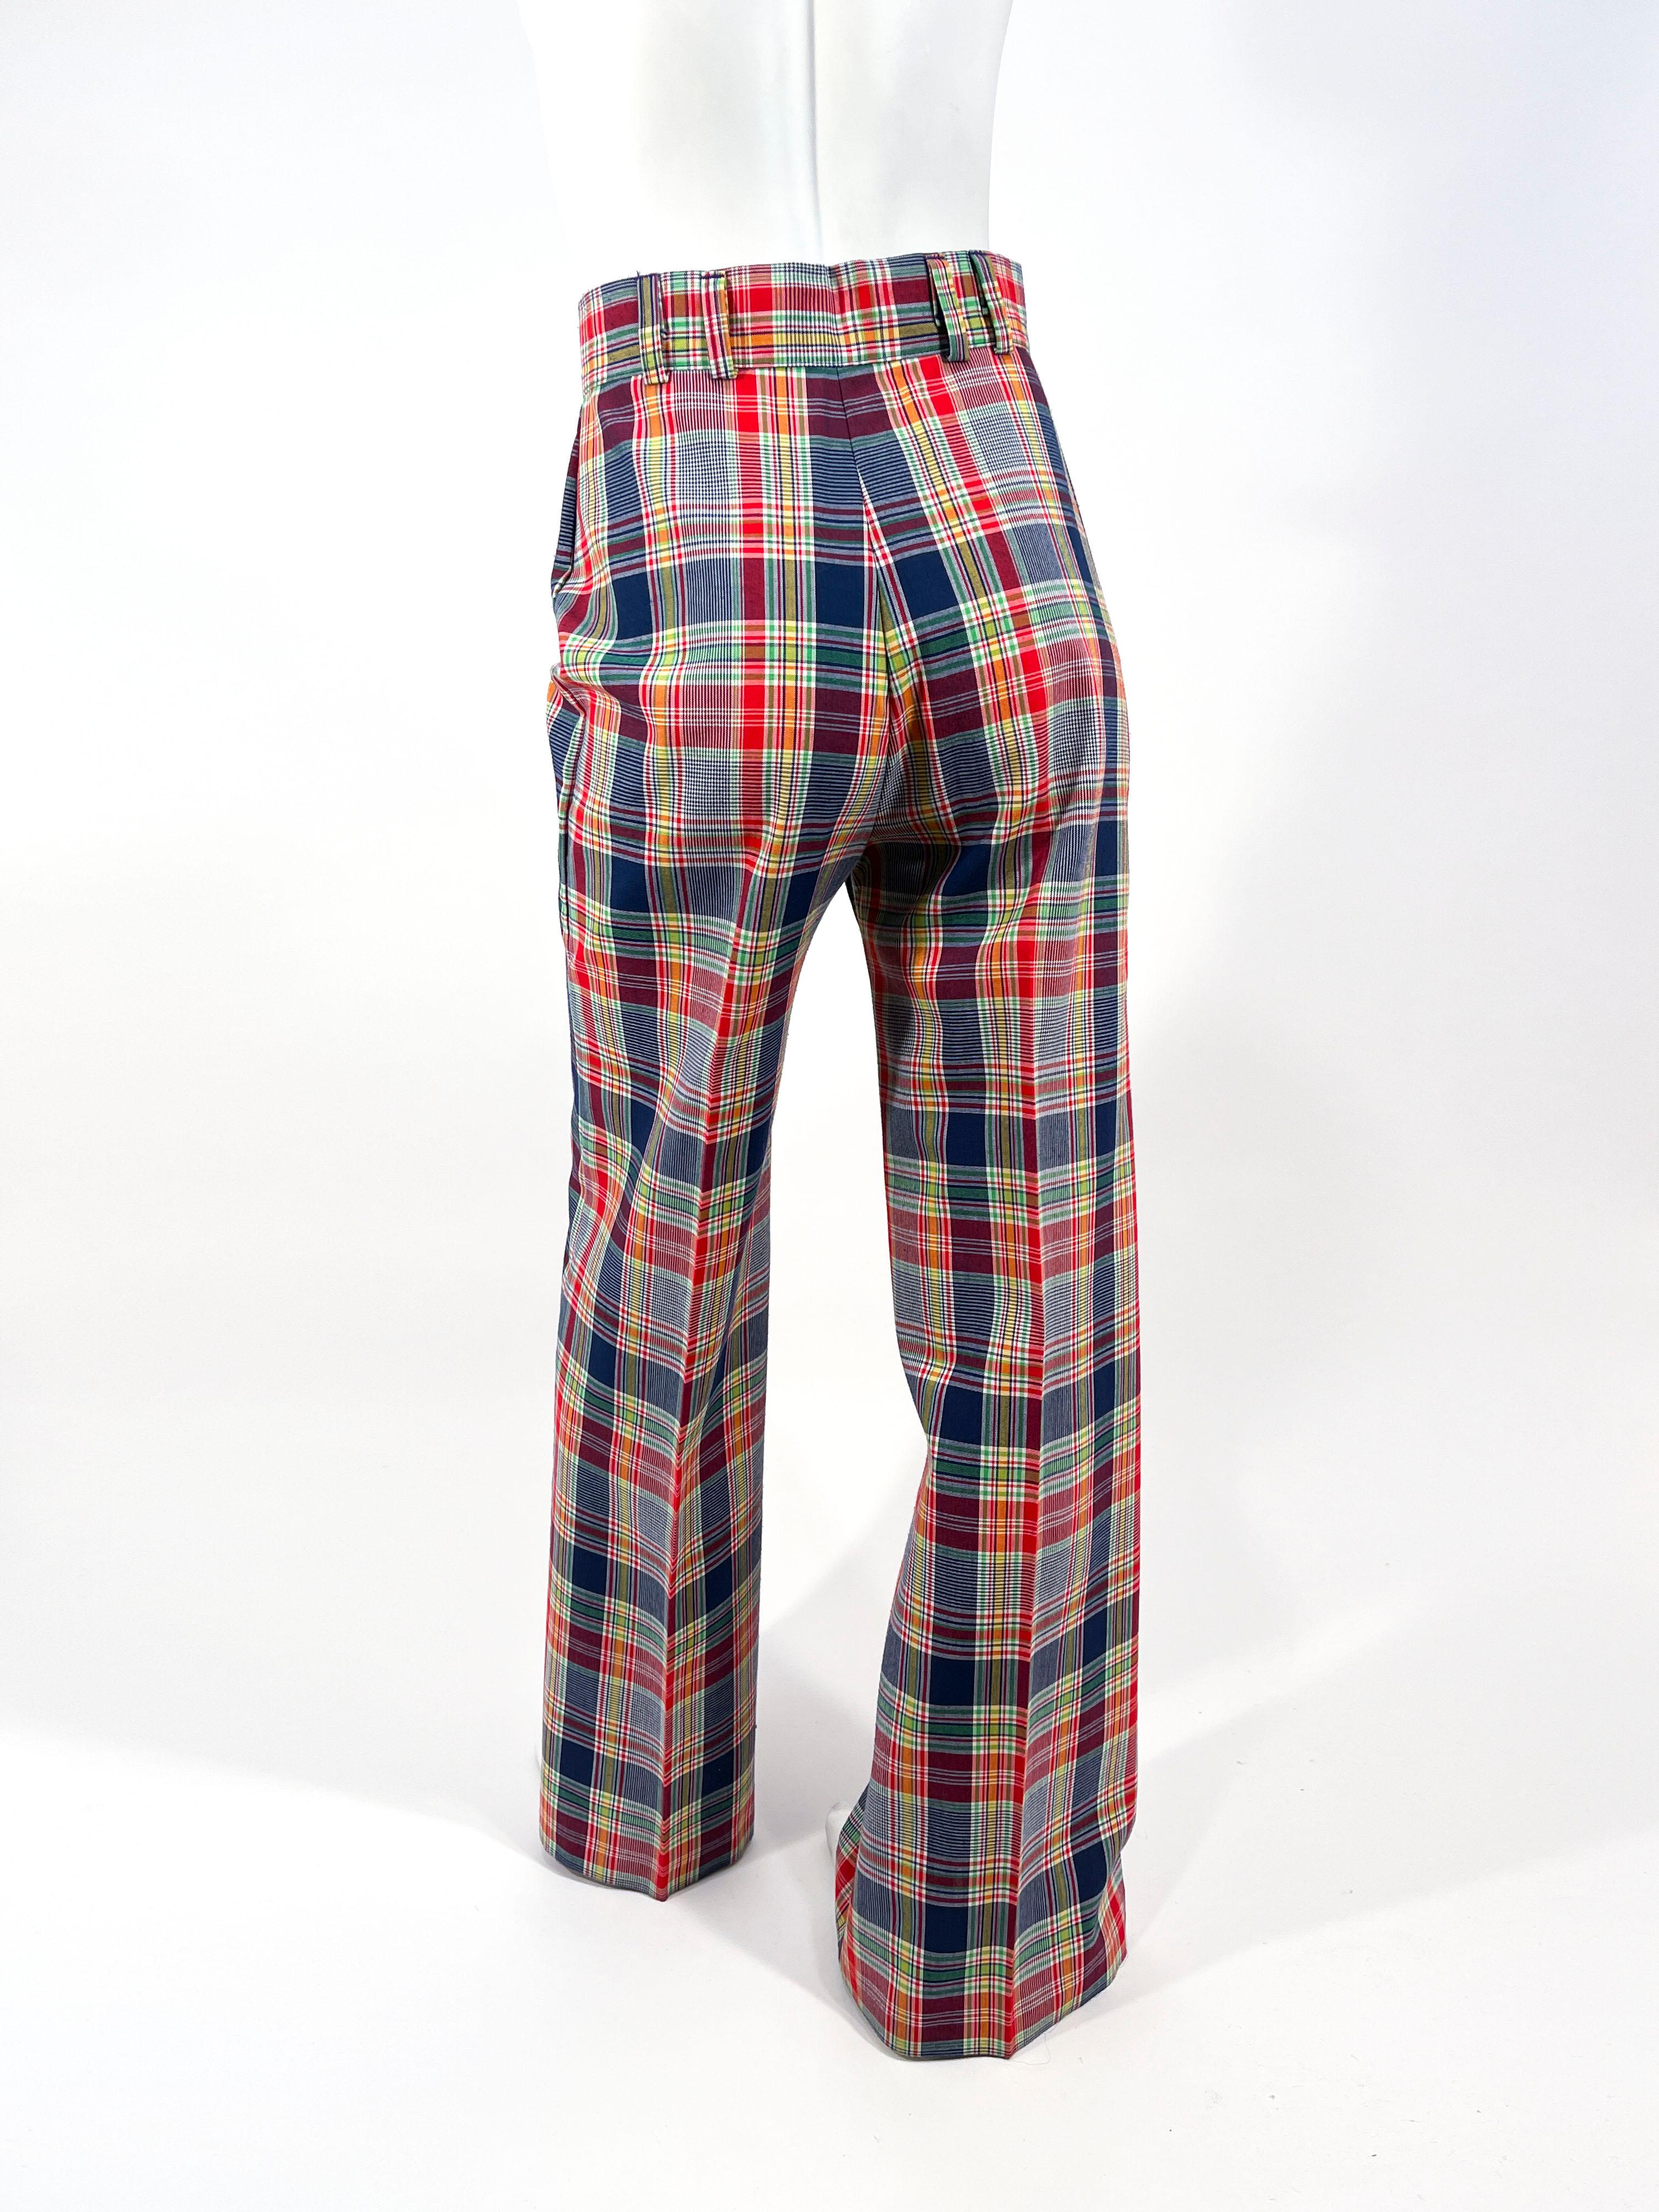 1970s Plaid Multi-colored Plaid Wide Legged Pants In Excellent Condition For Sale In San Francisco, CA